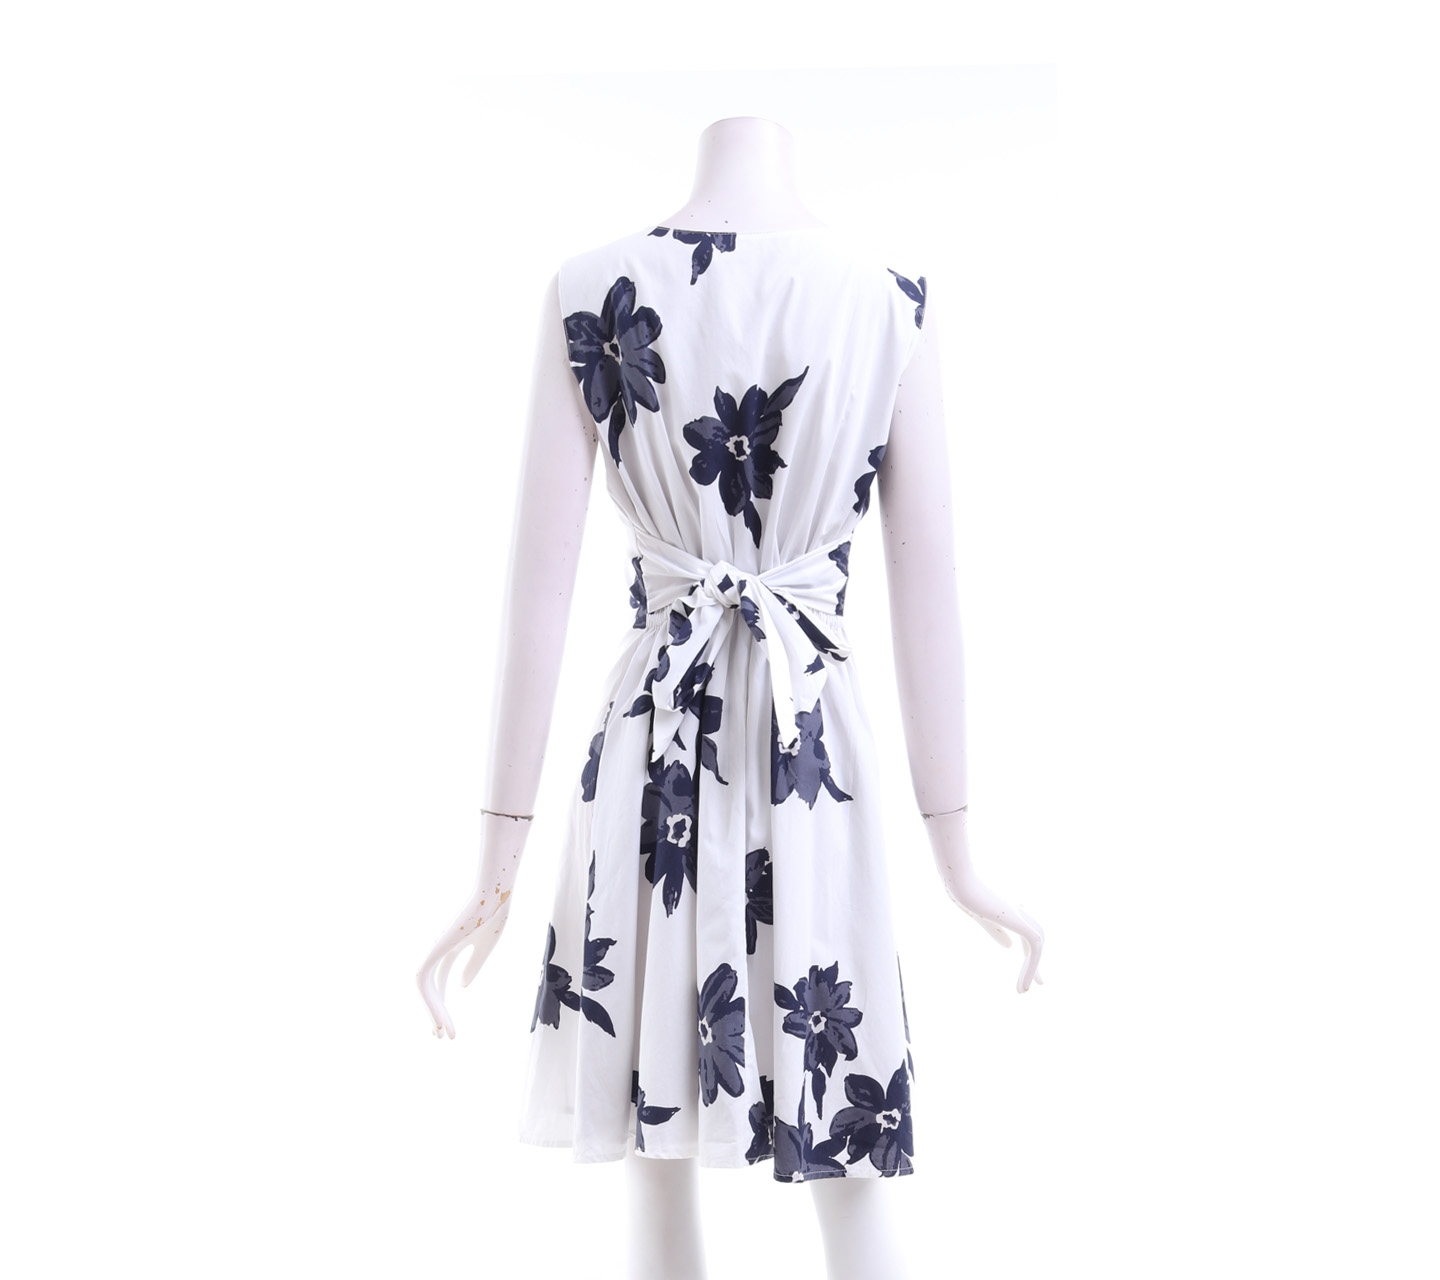 Roomy's Whpite & Black Floral With Strap Mini Dress